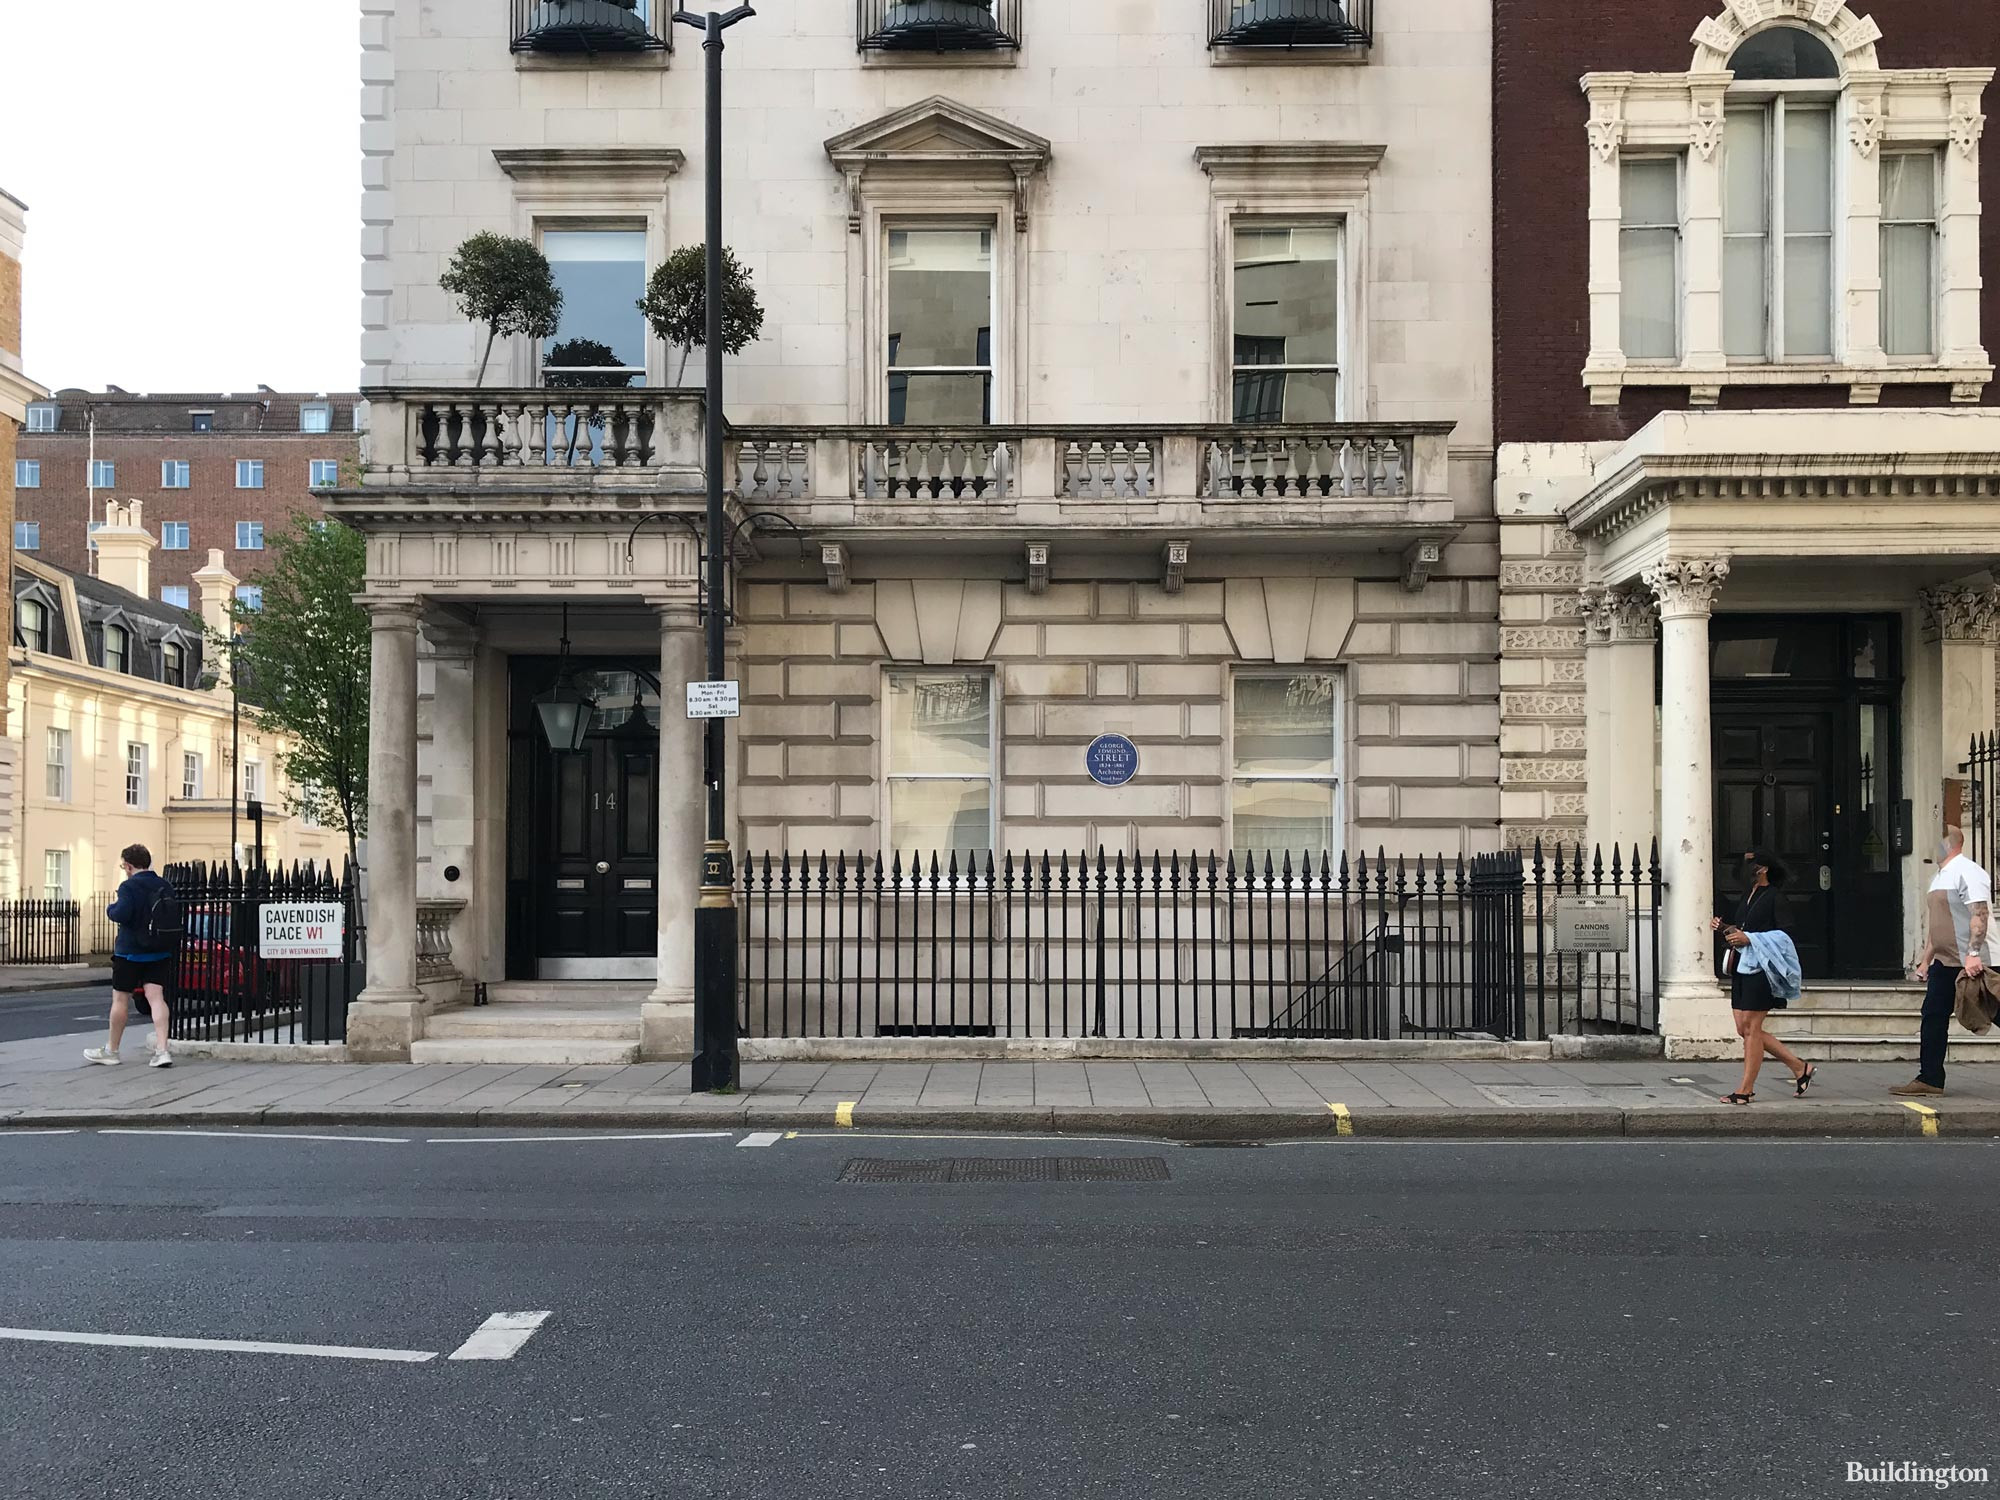 14 Cavendish Place building with blue plaque for George Edmund Street in Marylebone, London W1.